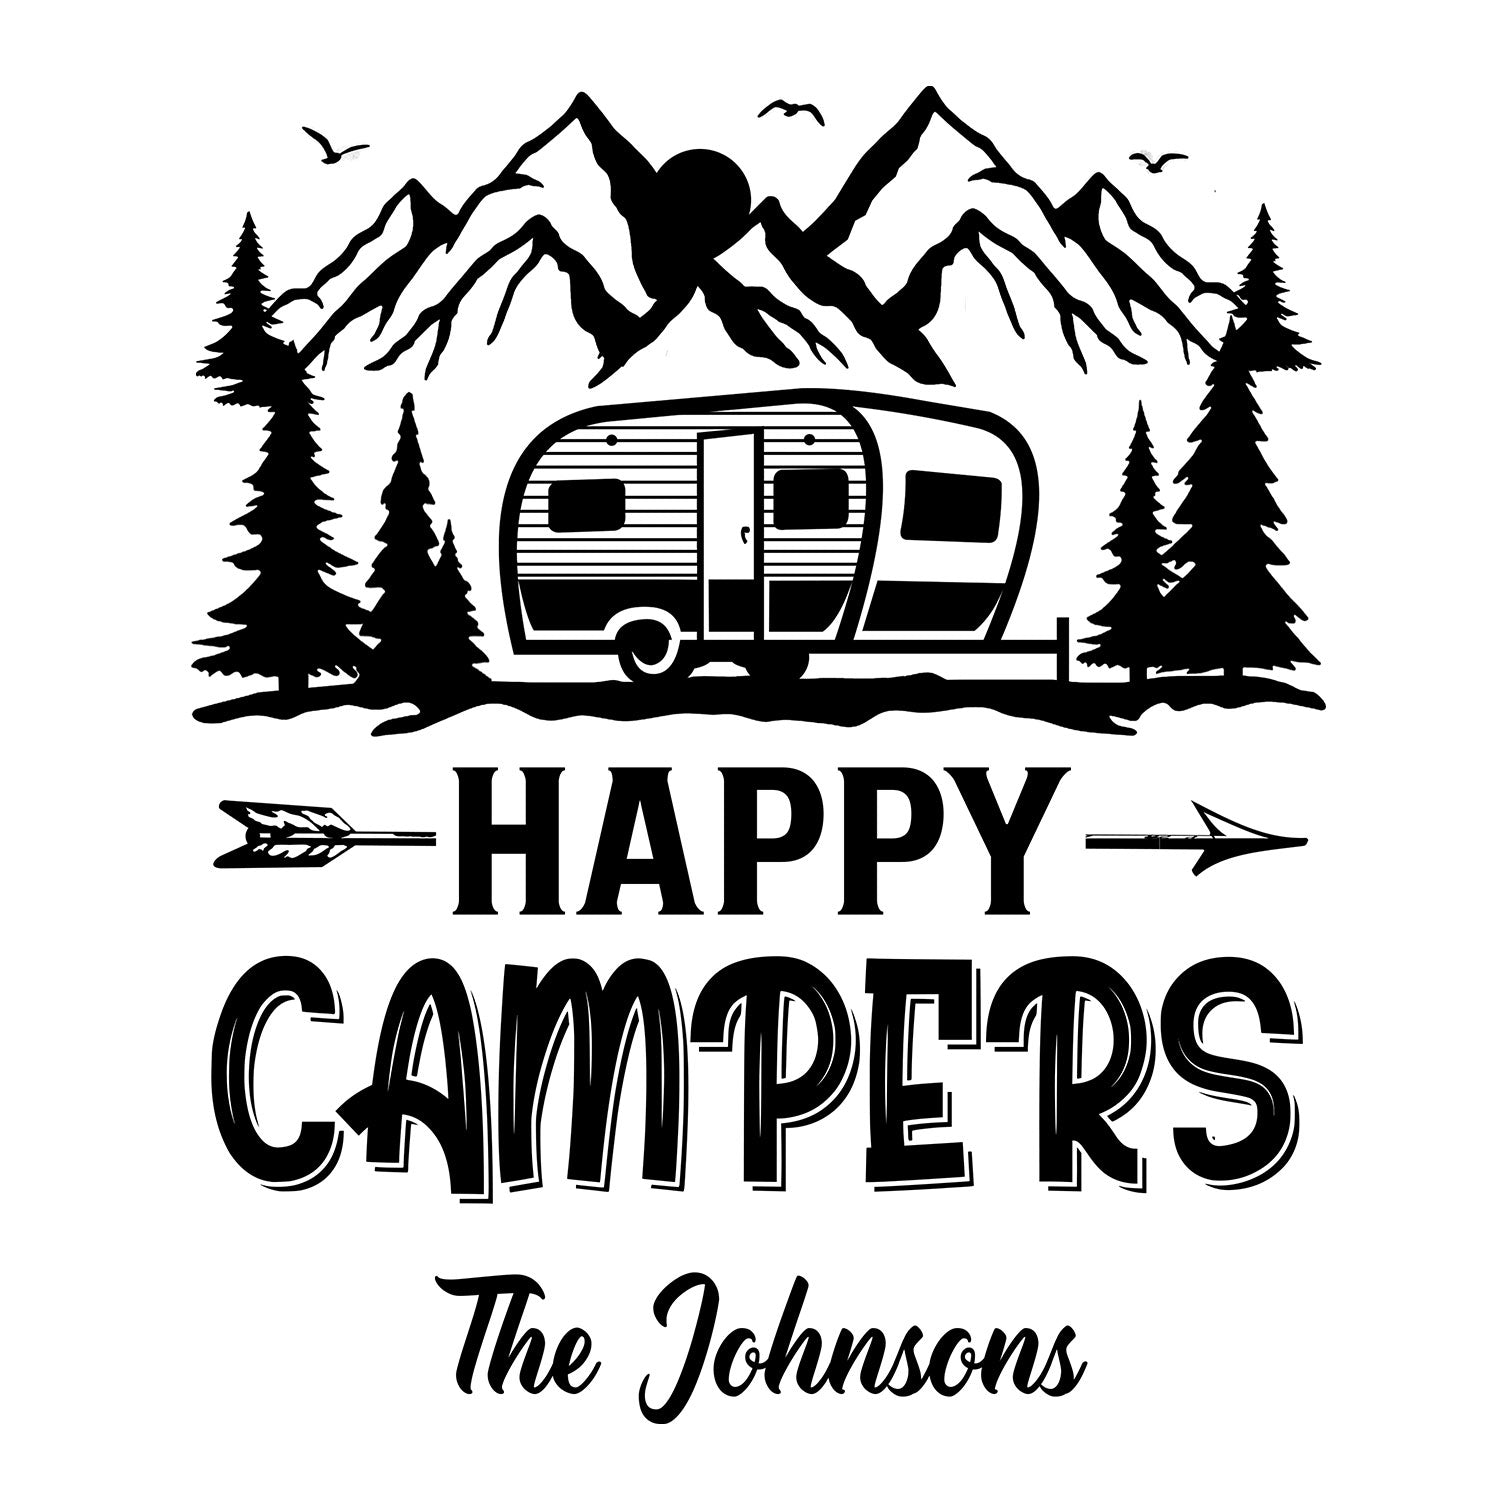 Happy Campers RV Trailer Tent - Vacation, Traveling, Funny Gift For Camping Lovers - Personalized Camping Decal, Decor Decal